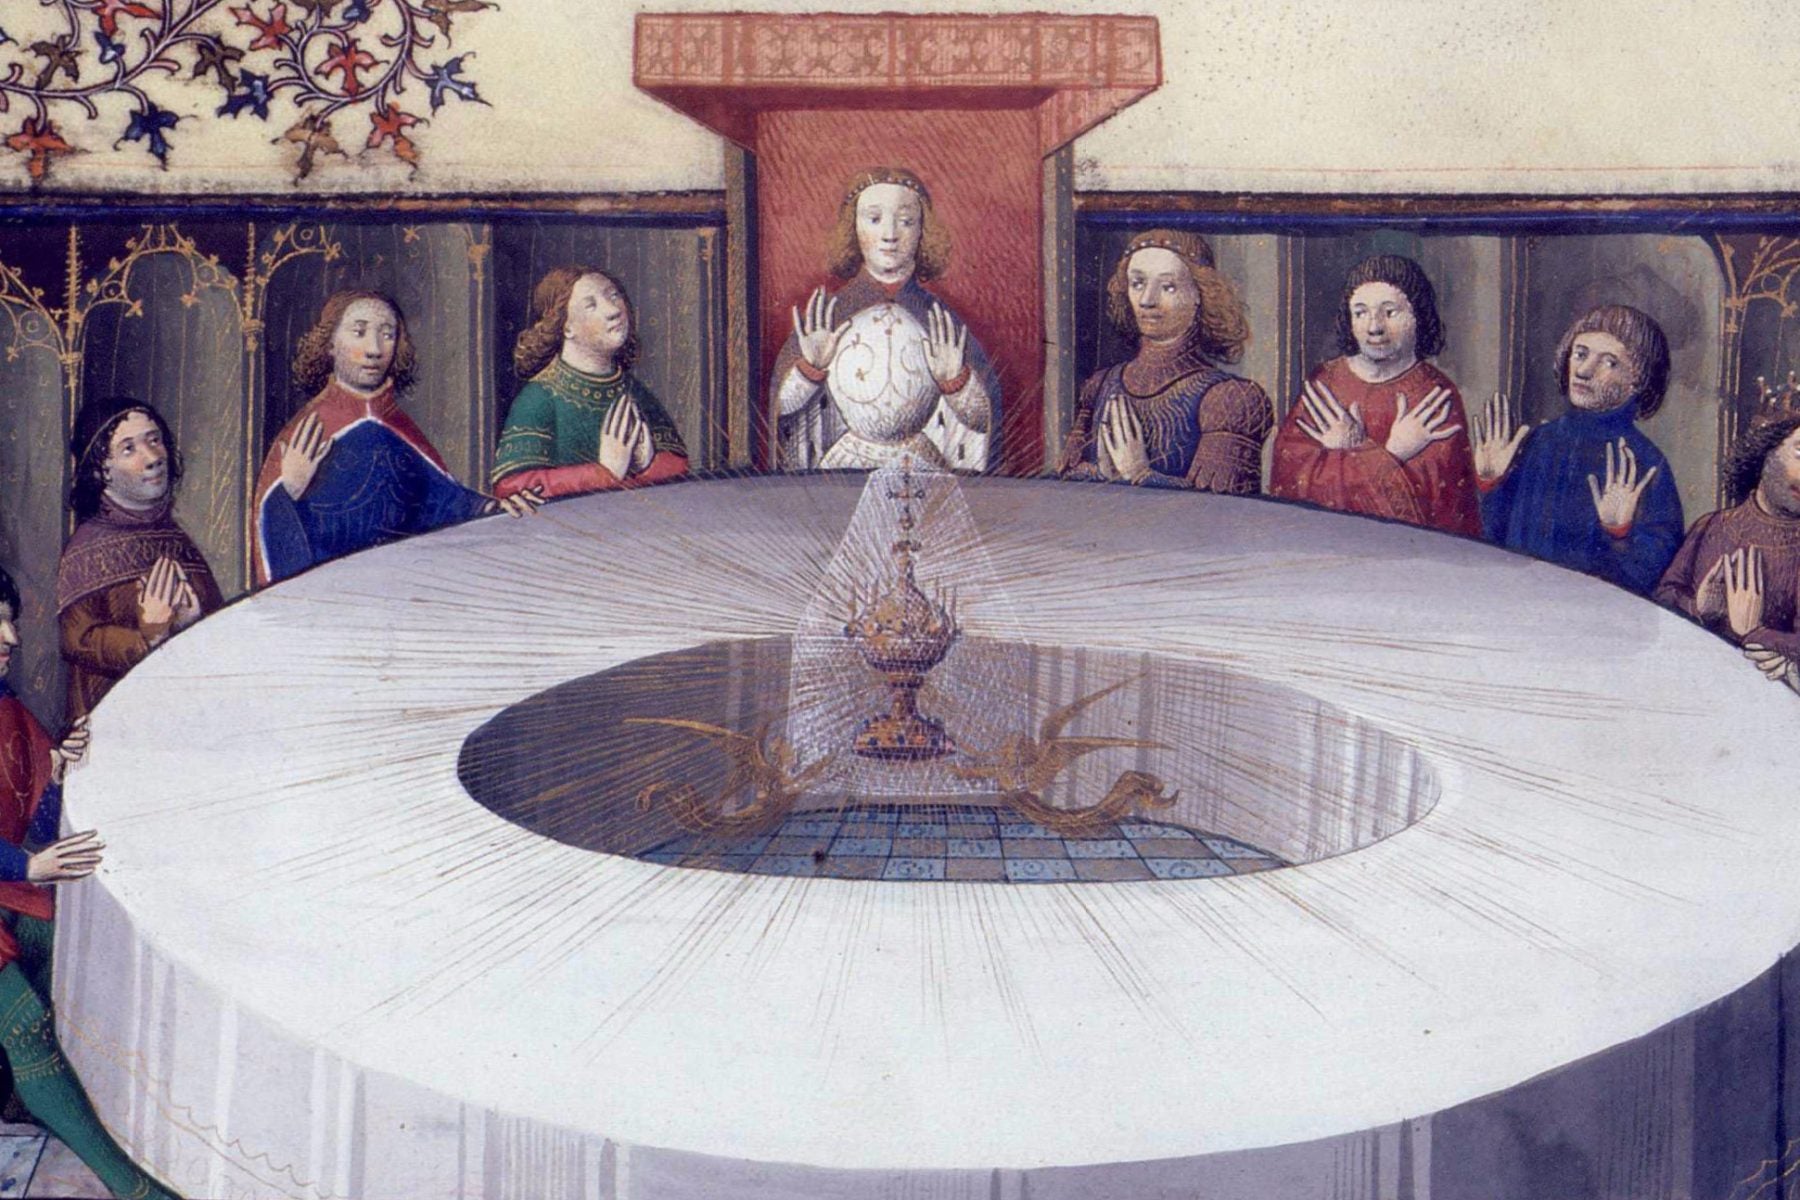 King Arthur's knights, gathered at the Round Table to celebrate Pentecost, see a vision of the Holy Grail.